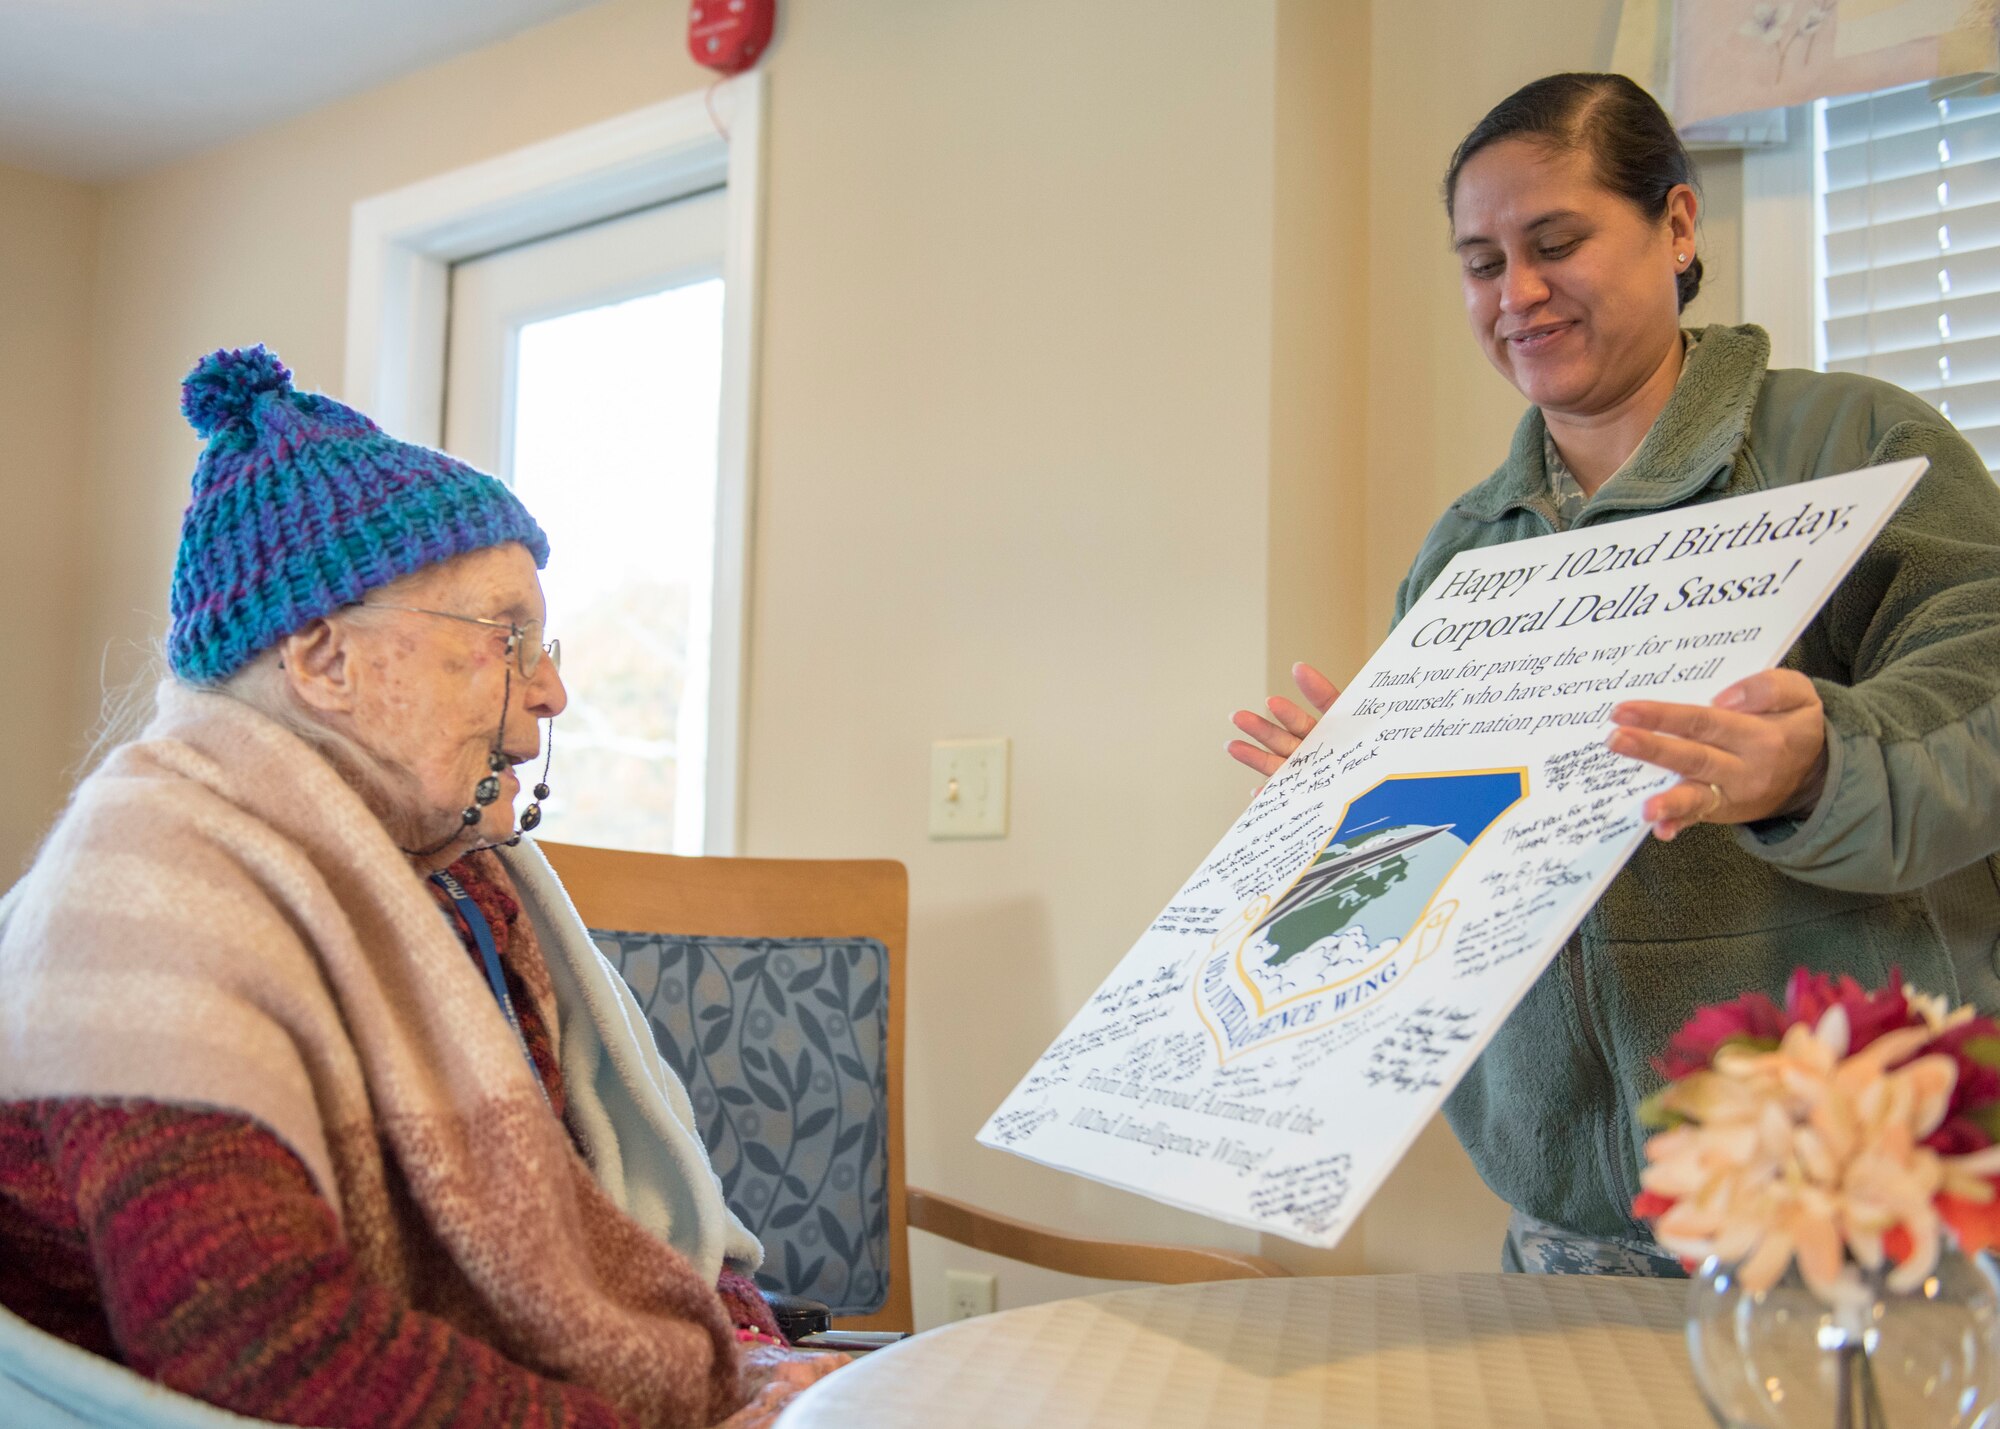 U.S. Air Force Airmen from the Massachusetts Air National Guard’s 102nd Intelligence Wing wish fellow Airman, U.S. Army Air Corps veteran Della Sassa a happy 102nd birthday at the Royal Cape Cod Nursing and Rehabilitation Center in Buzzards Bay Mass. on November 8, 2019. (U.S. Air National Guard photo by Tech. Sgt. Thomas Swanson)